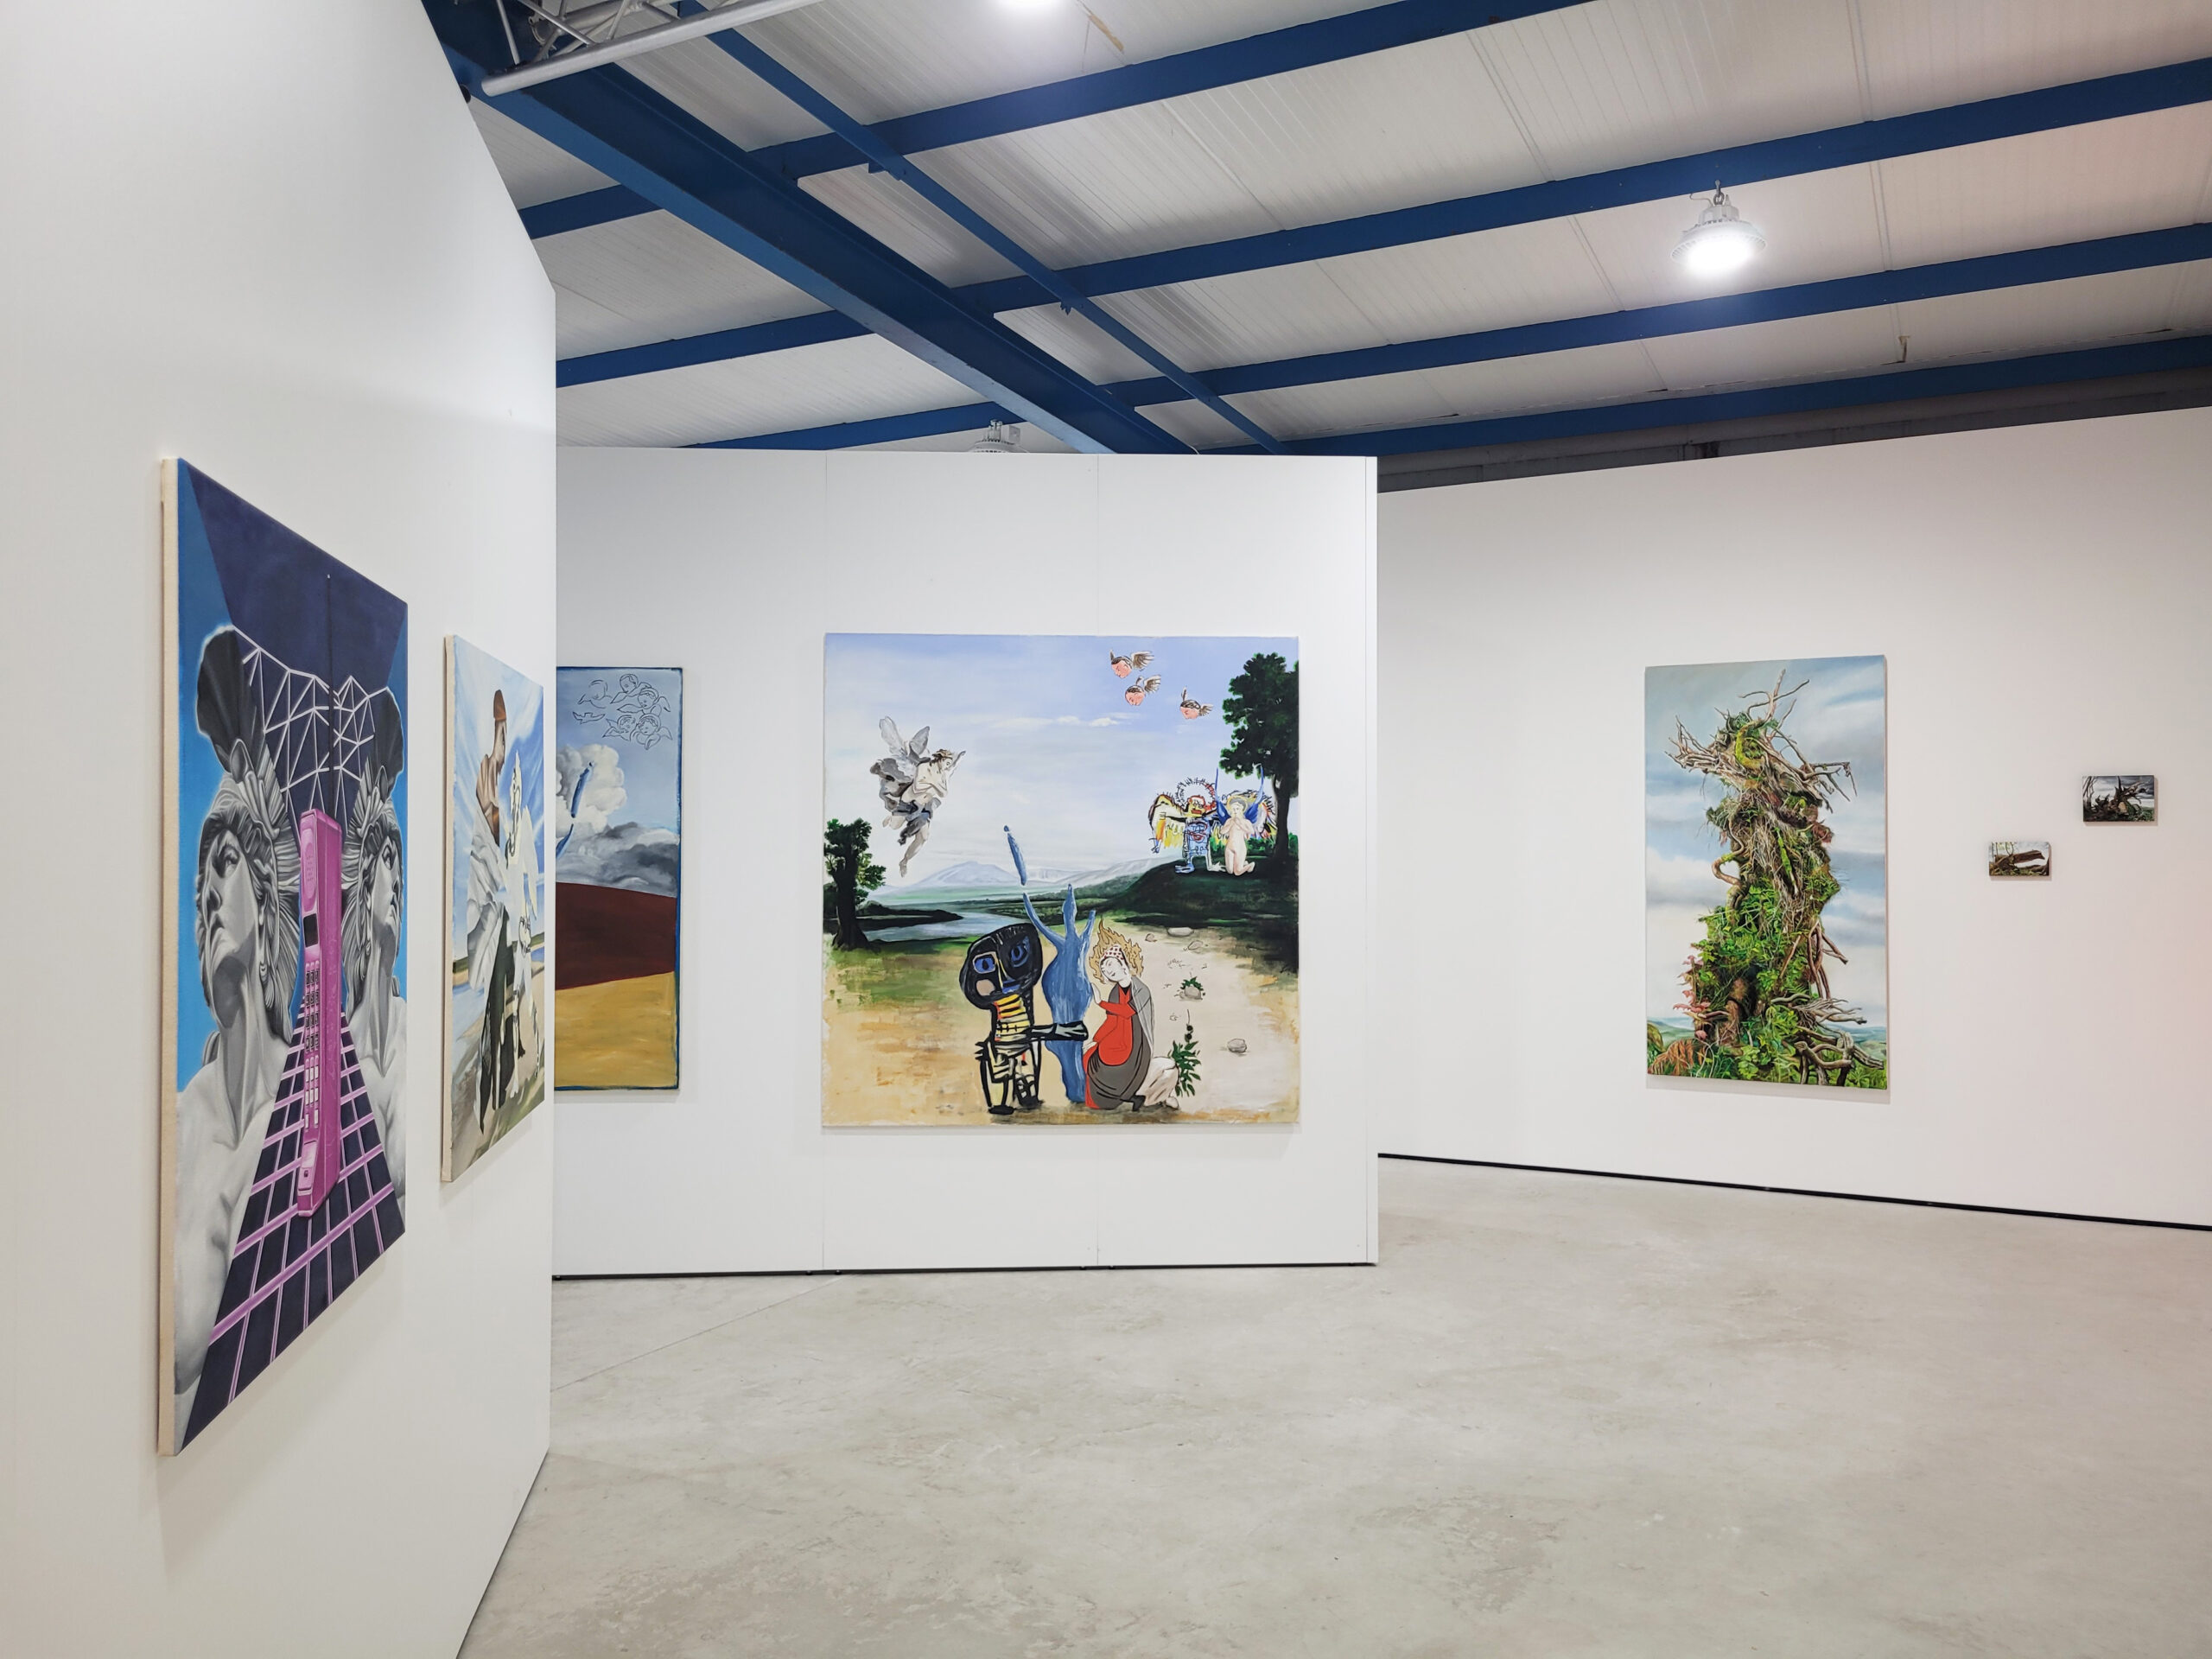 Installation view with multiple paintings visible including a scene on a beach and an overgrown tree trunk